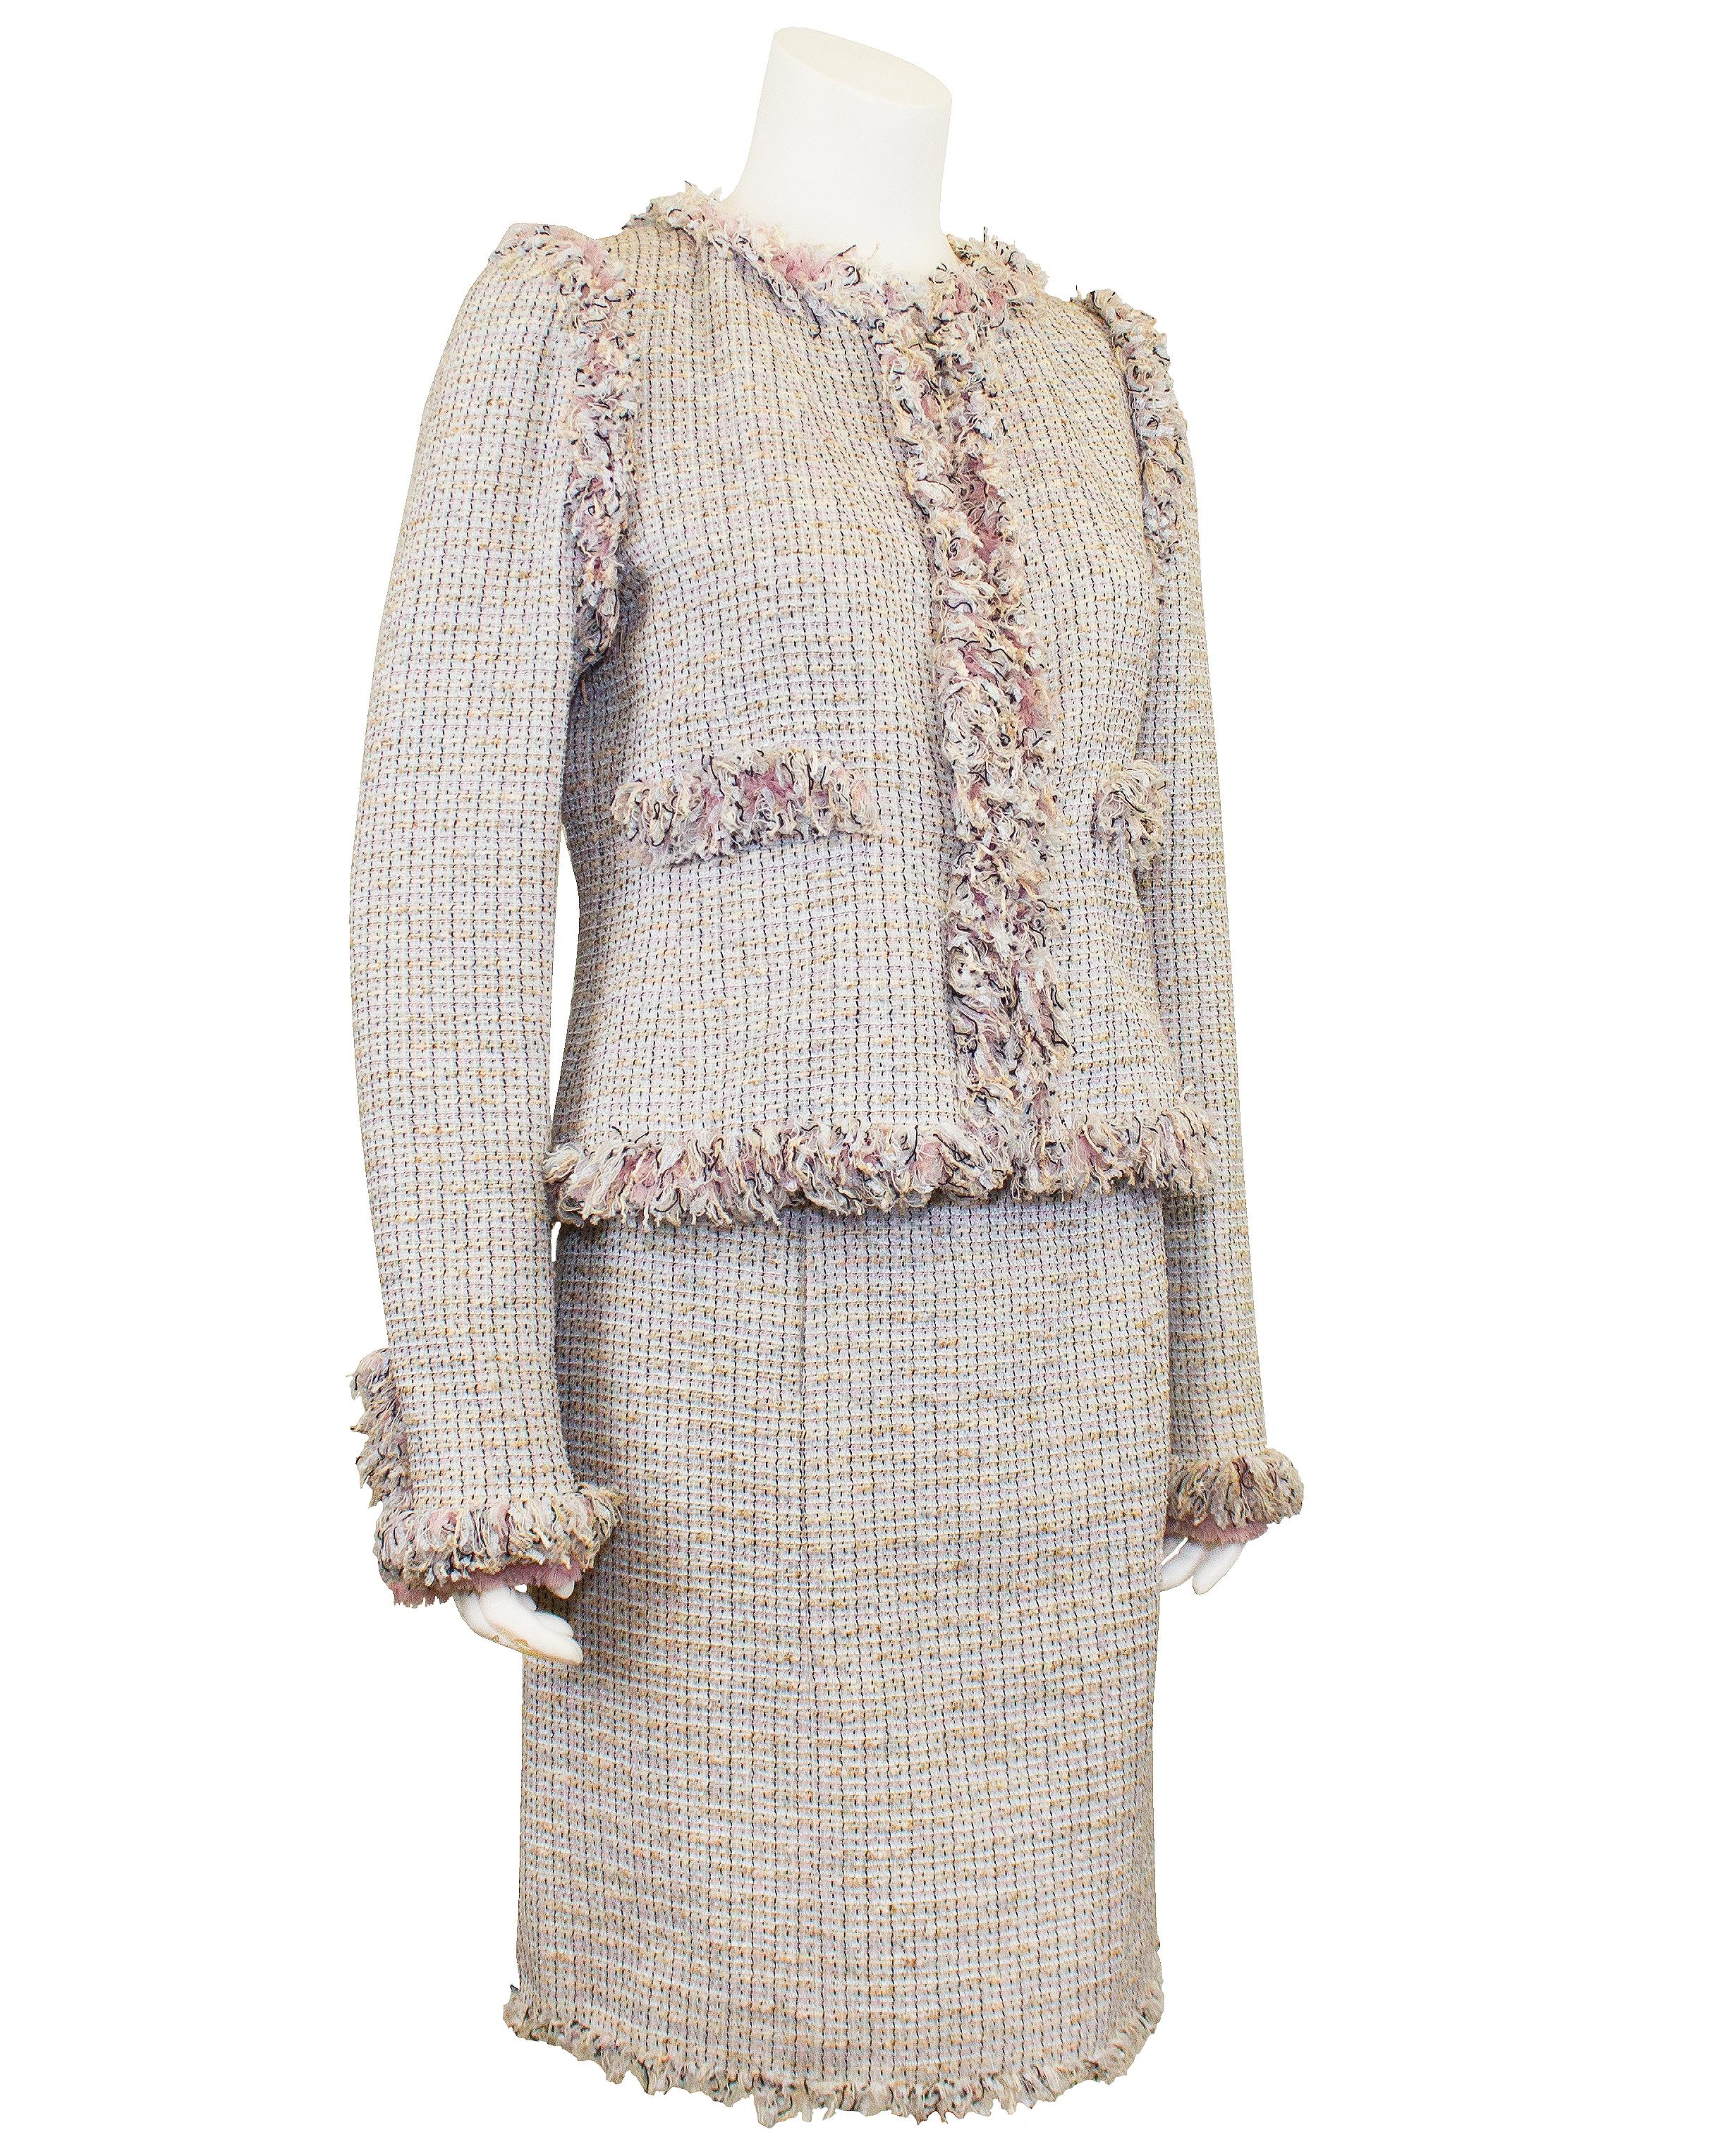 Chanel tweed skirt suit from the Spring 2004 collection. This is a slightly paired down version from the version presented on the runway. Crafted from a lightweight pale pink, pale blue, black and beige tweed, this suit is perfect for the Spring and